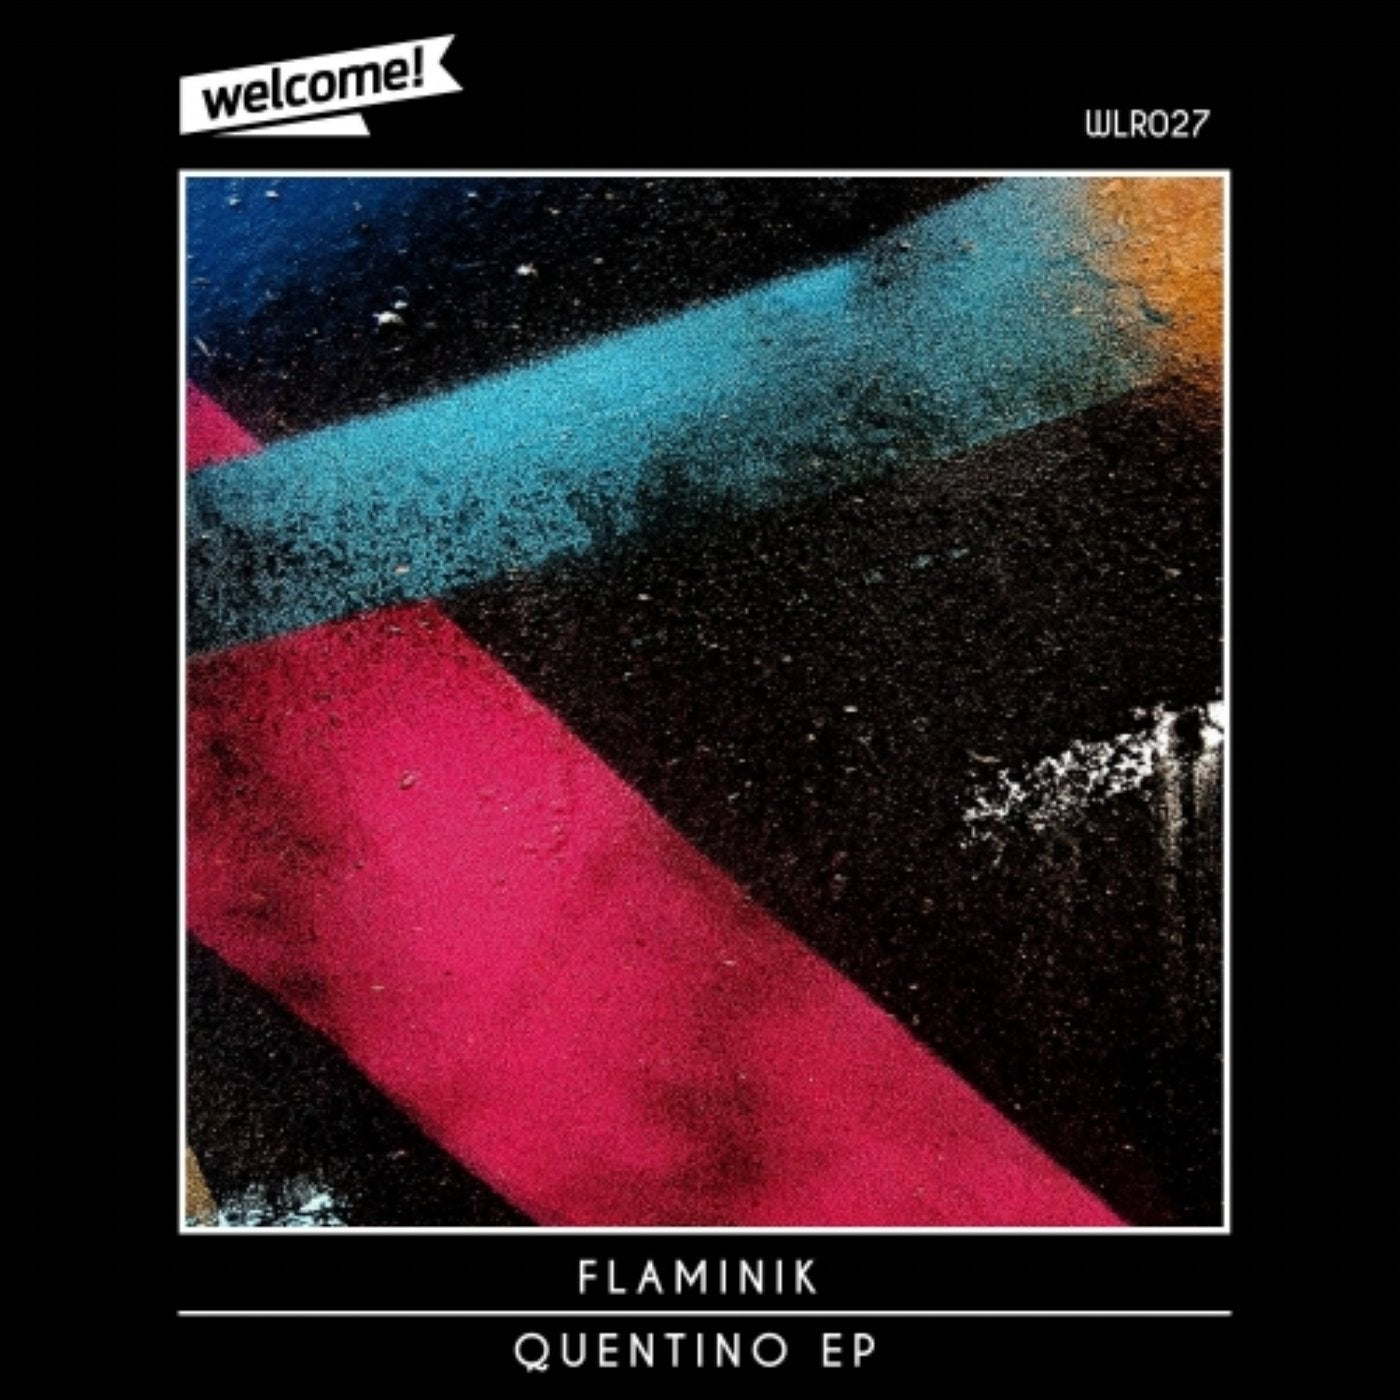 Quentino EP